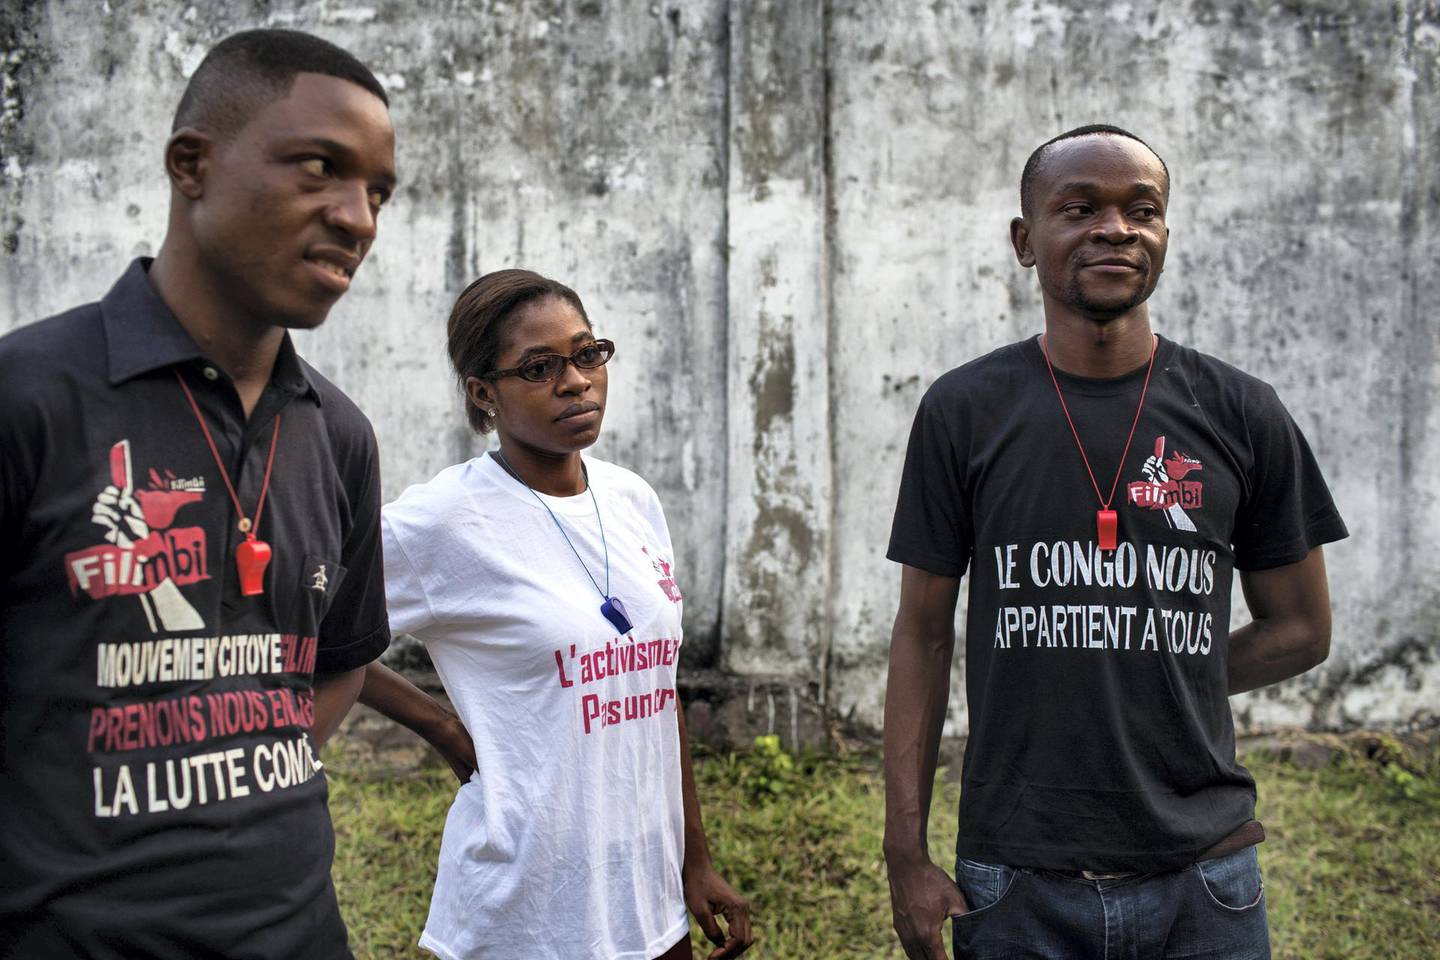 Left to right, Adonis Kabeya, 31; Audrey Kendra, 21; and Alain Mulumba Kabeya, 28;  of the Kinshasa cell of Filimbi, a pro-democracy group whose name means "whistle" in Swahili, at his home in Kinshasa, DRC, Aug. 14, 2018. After languishing nearly nine months in jail while they awaited a verdict, four of Filimbi's activists were recently convicted of “disturbing the public order” and “insulting the head of state” and sentenced to one year in prison.